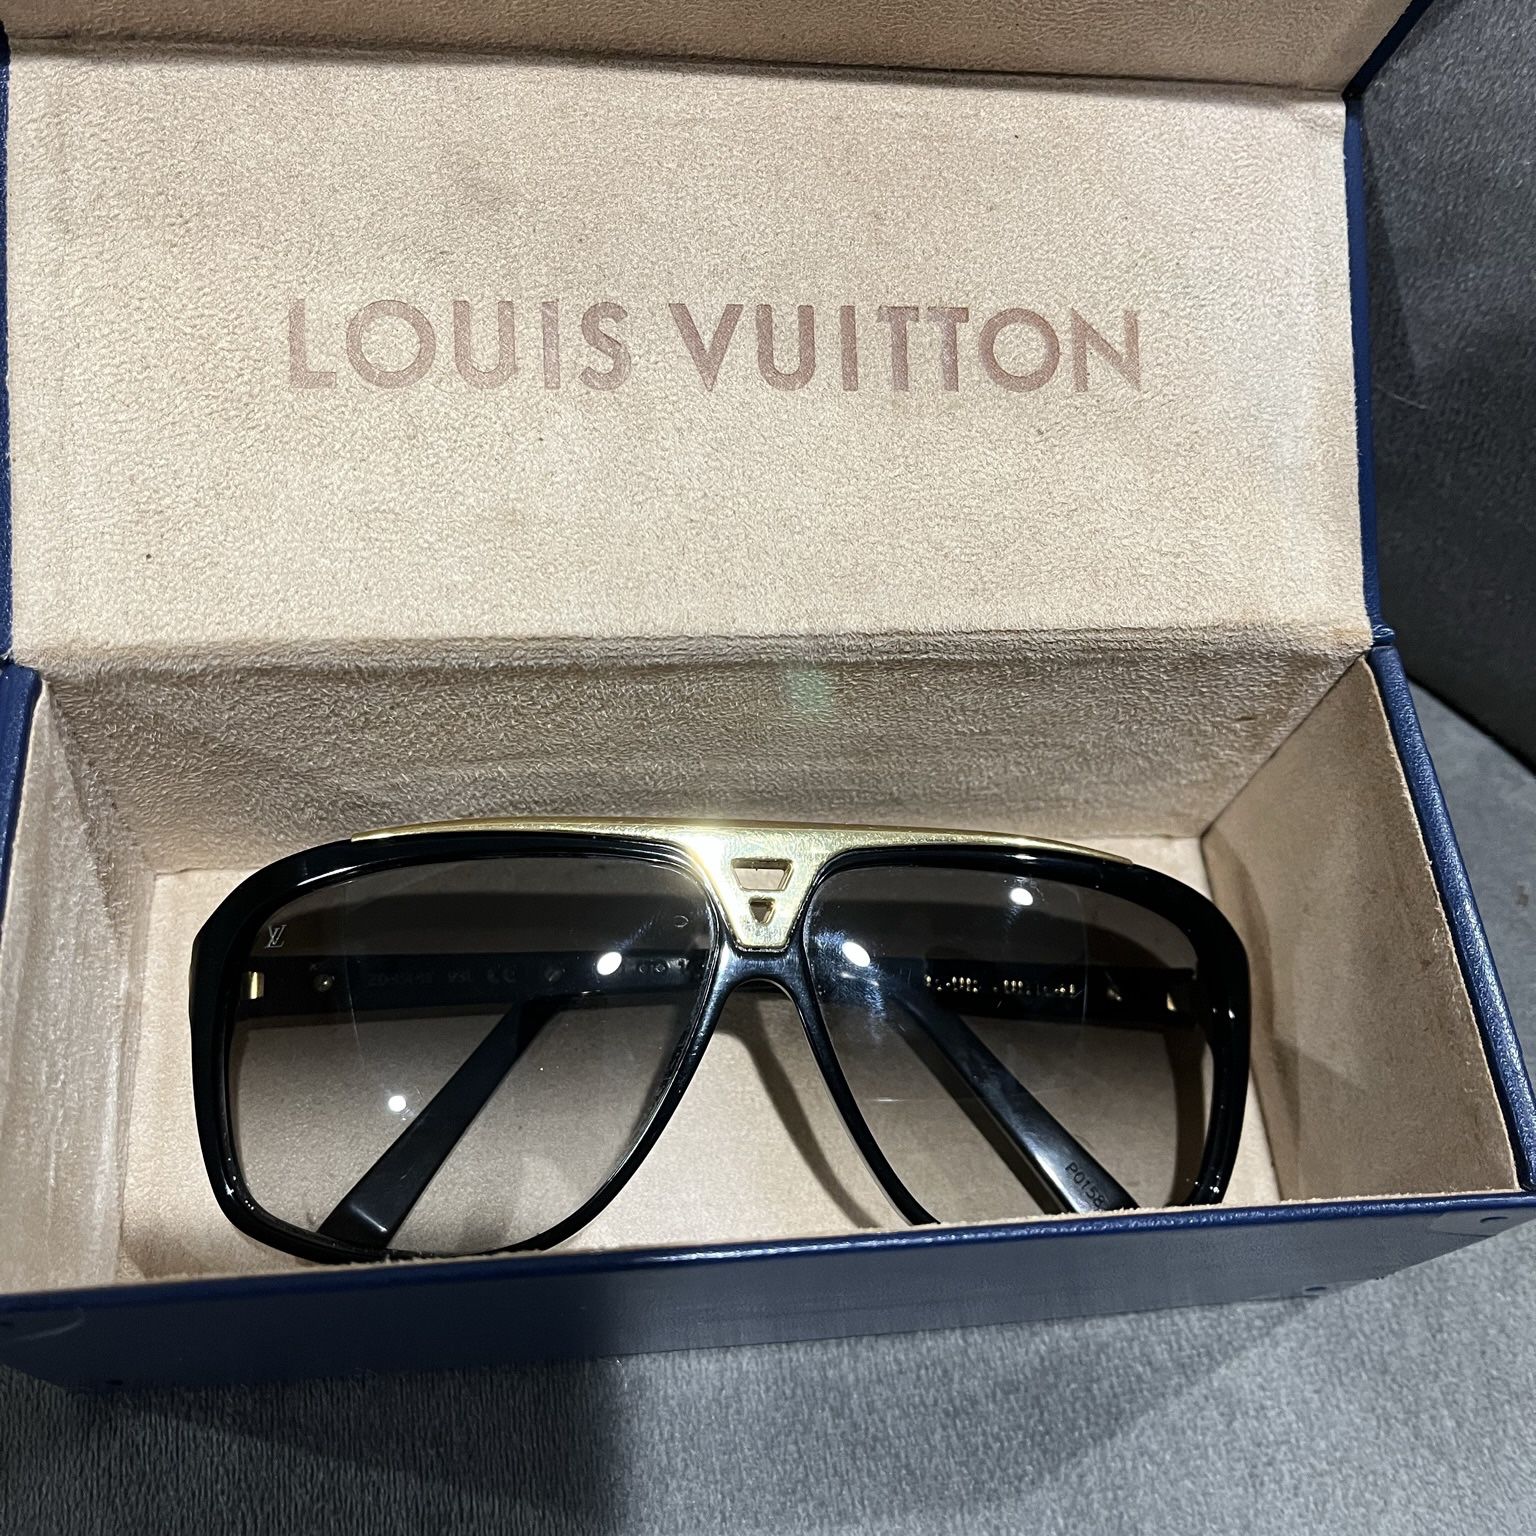 *BEST OFFER* Brand New Louis Vuitton Sunglasses for Sale in Buford, GA -  OfferUp